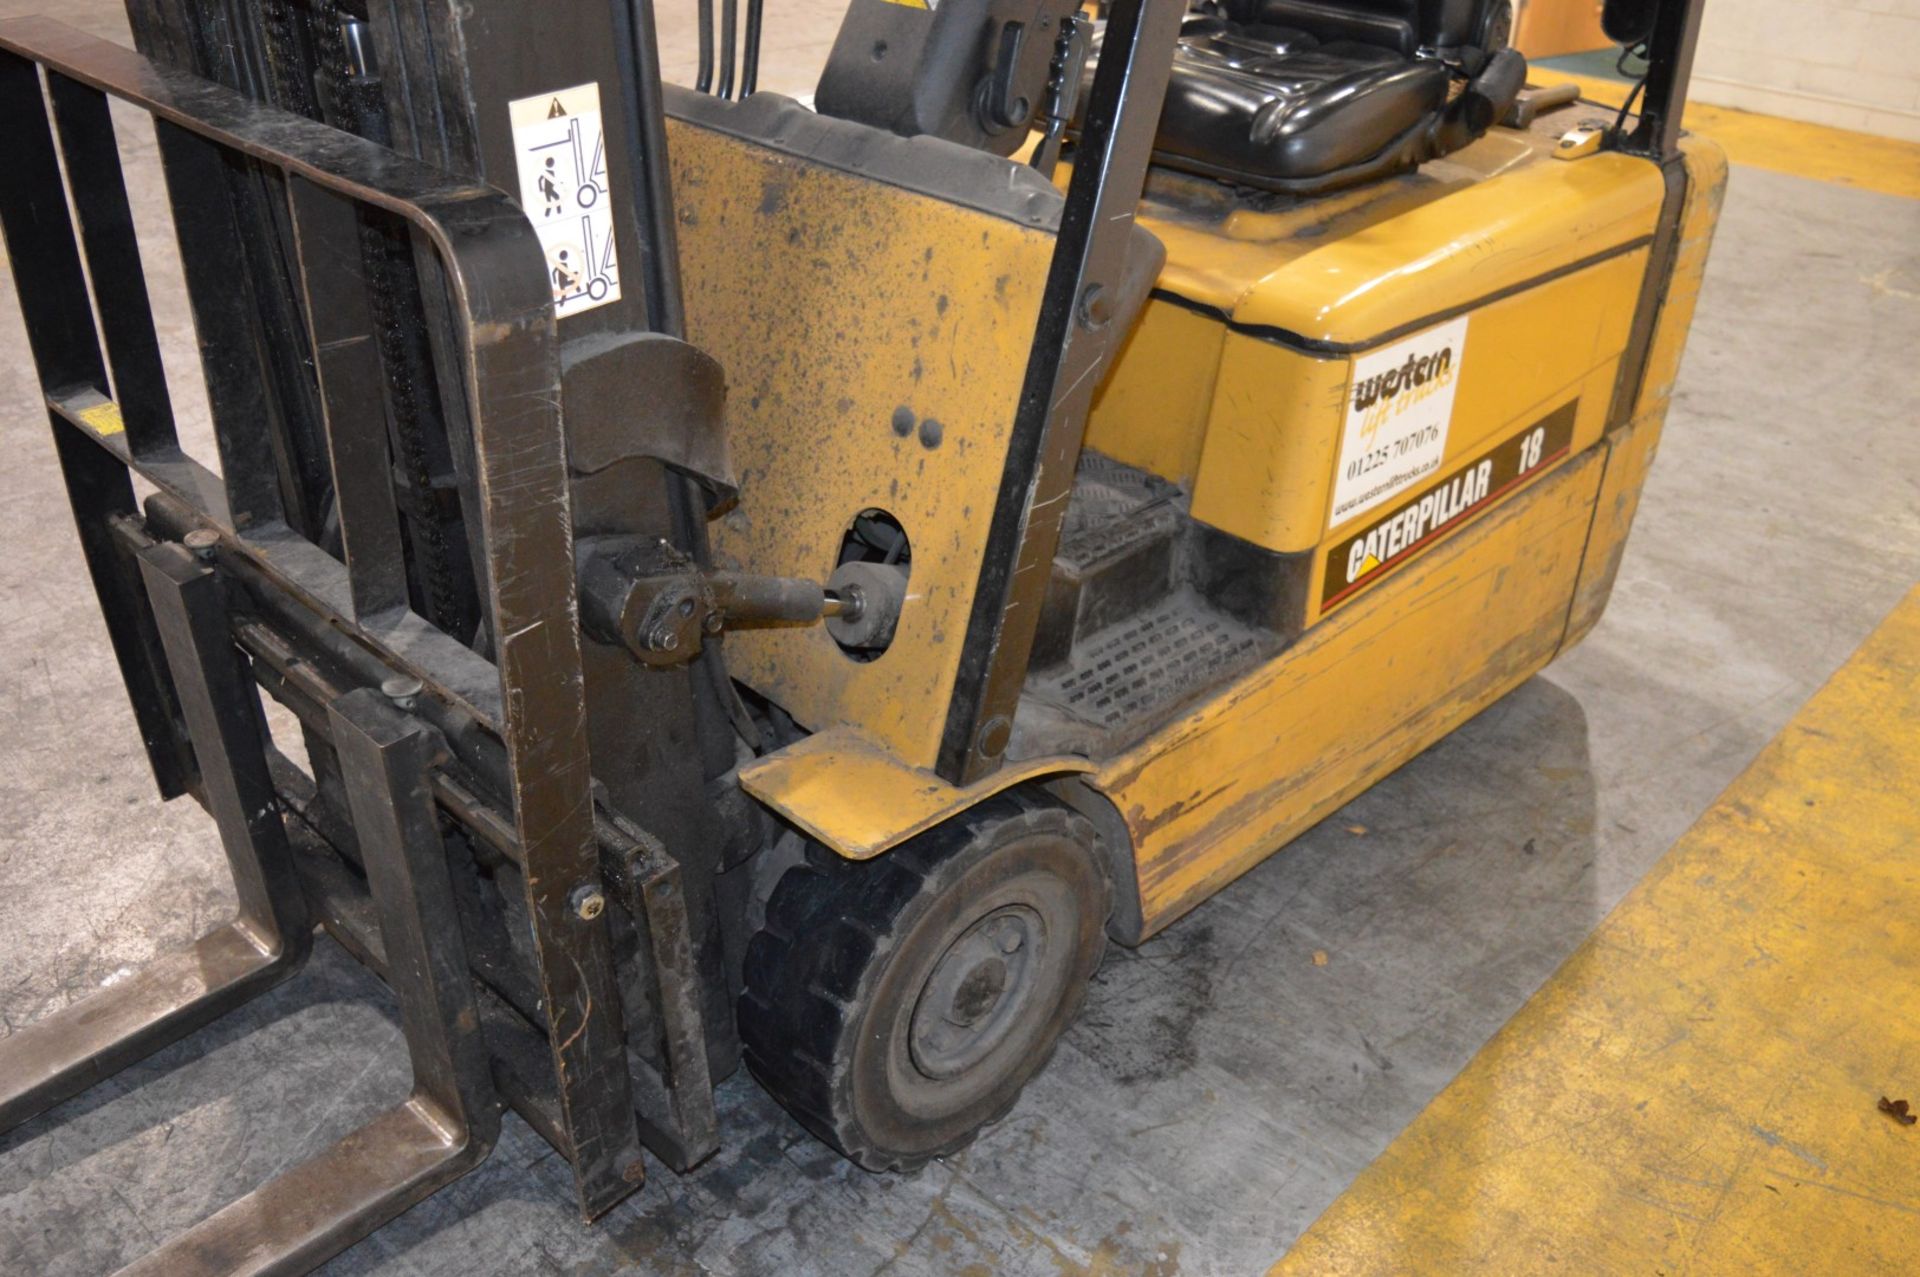 1 x Caterpillar Electric Counter Balance Forklift Truck - Model EP18KT - 1800kg Basic Capacity - - Image 8 of 14